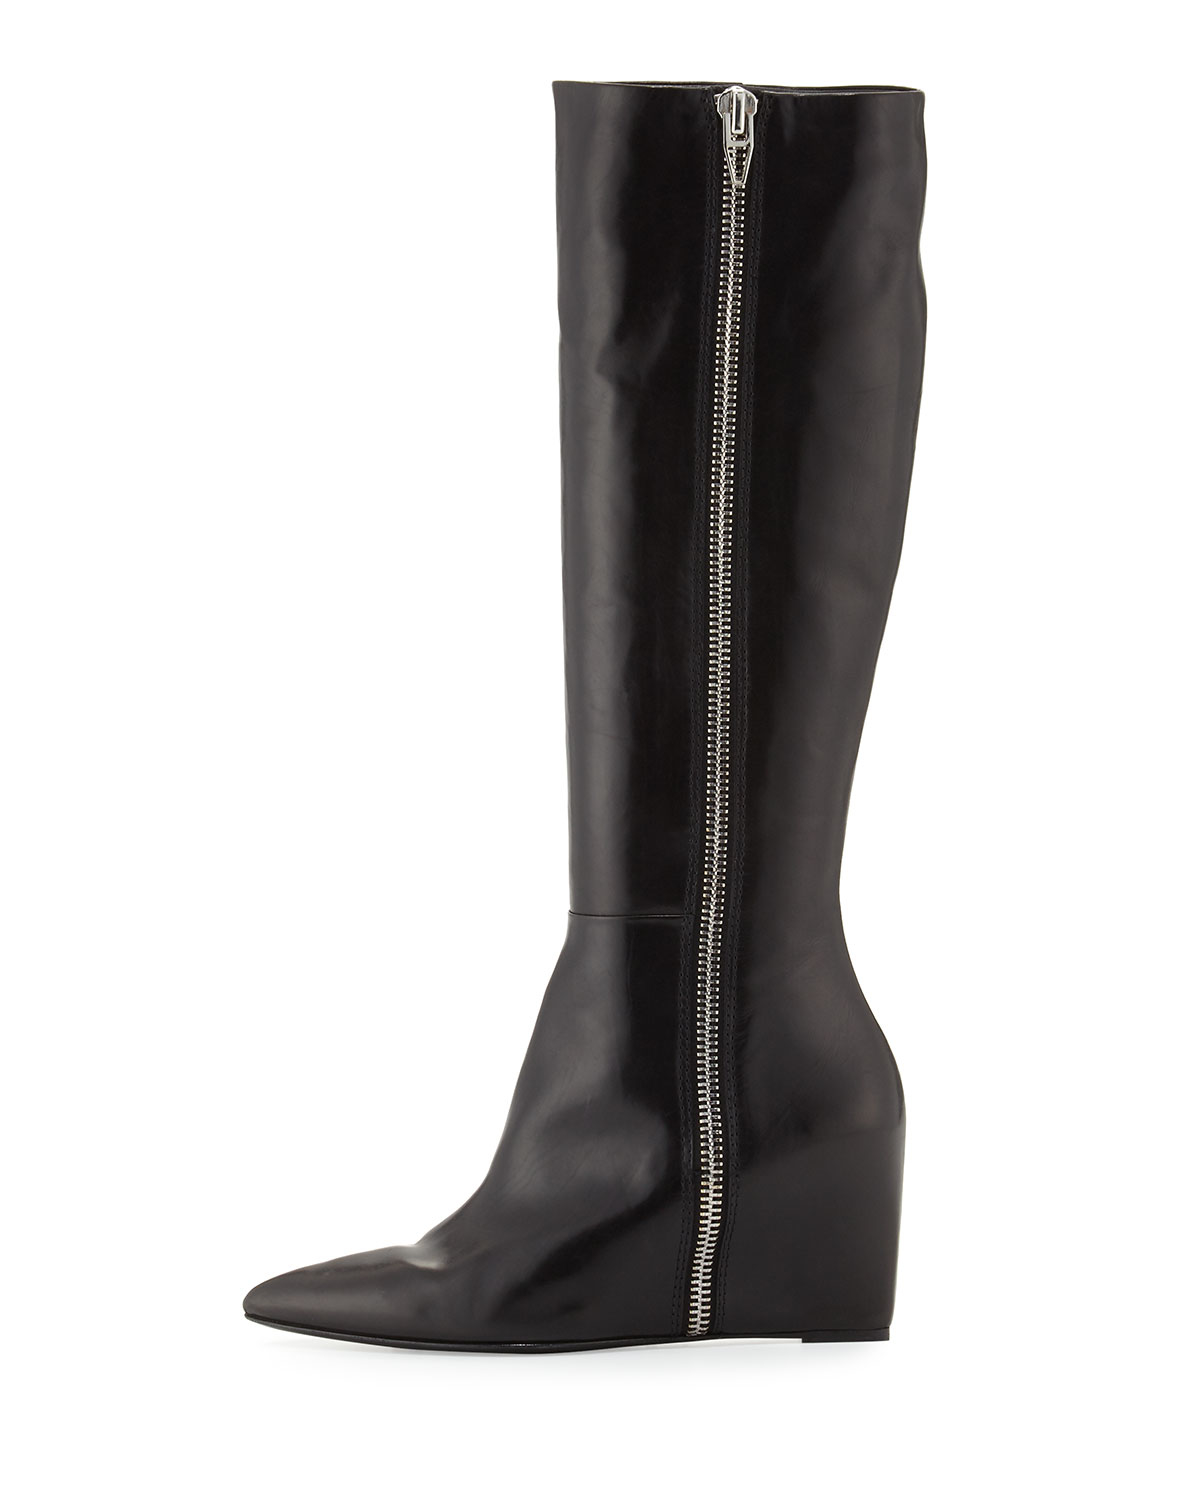 Alexander Wang Lea Tall Leather Wedge Boot in Black - Lyst